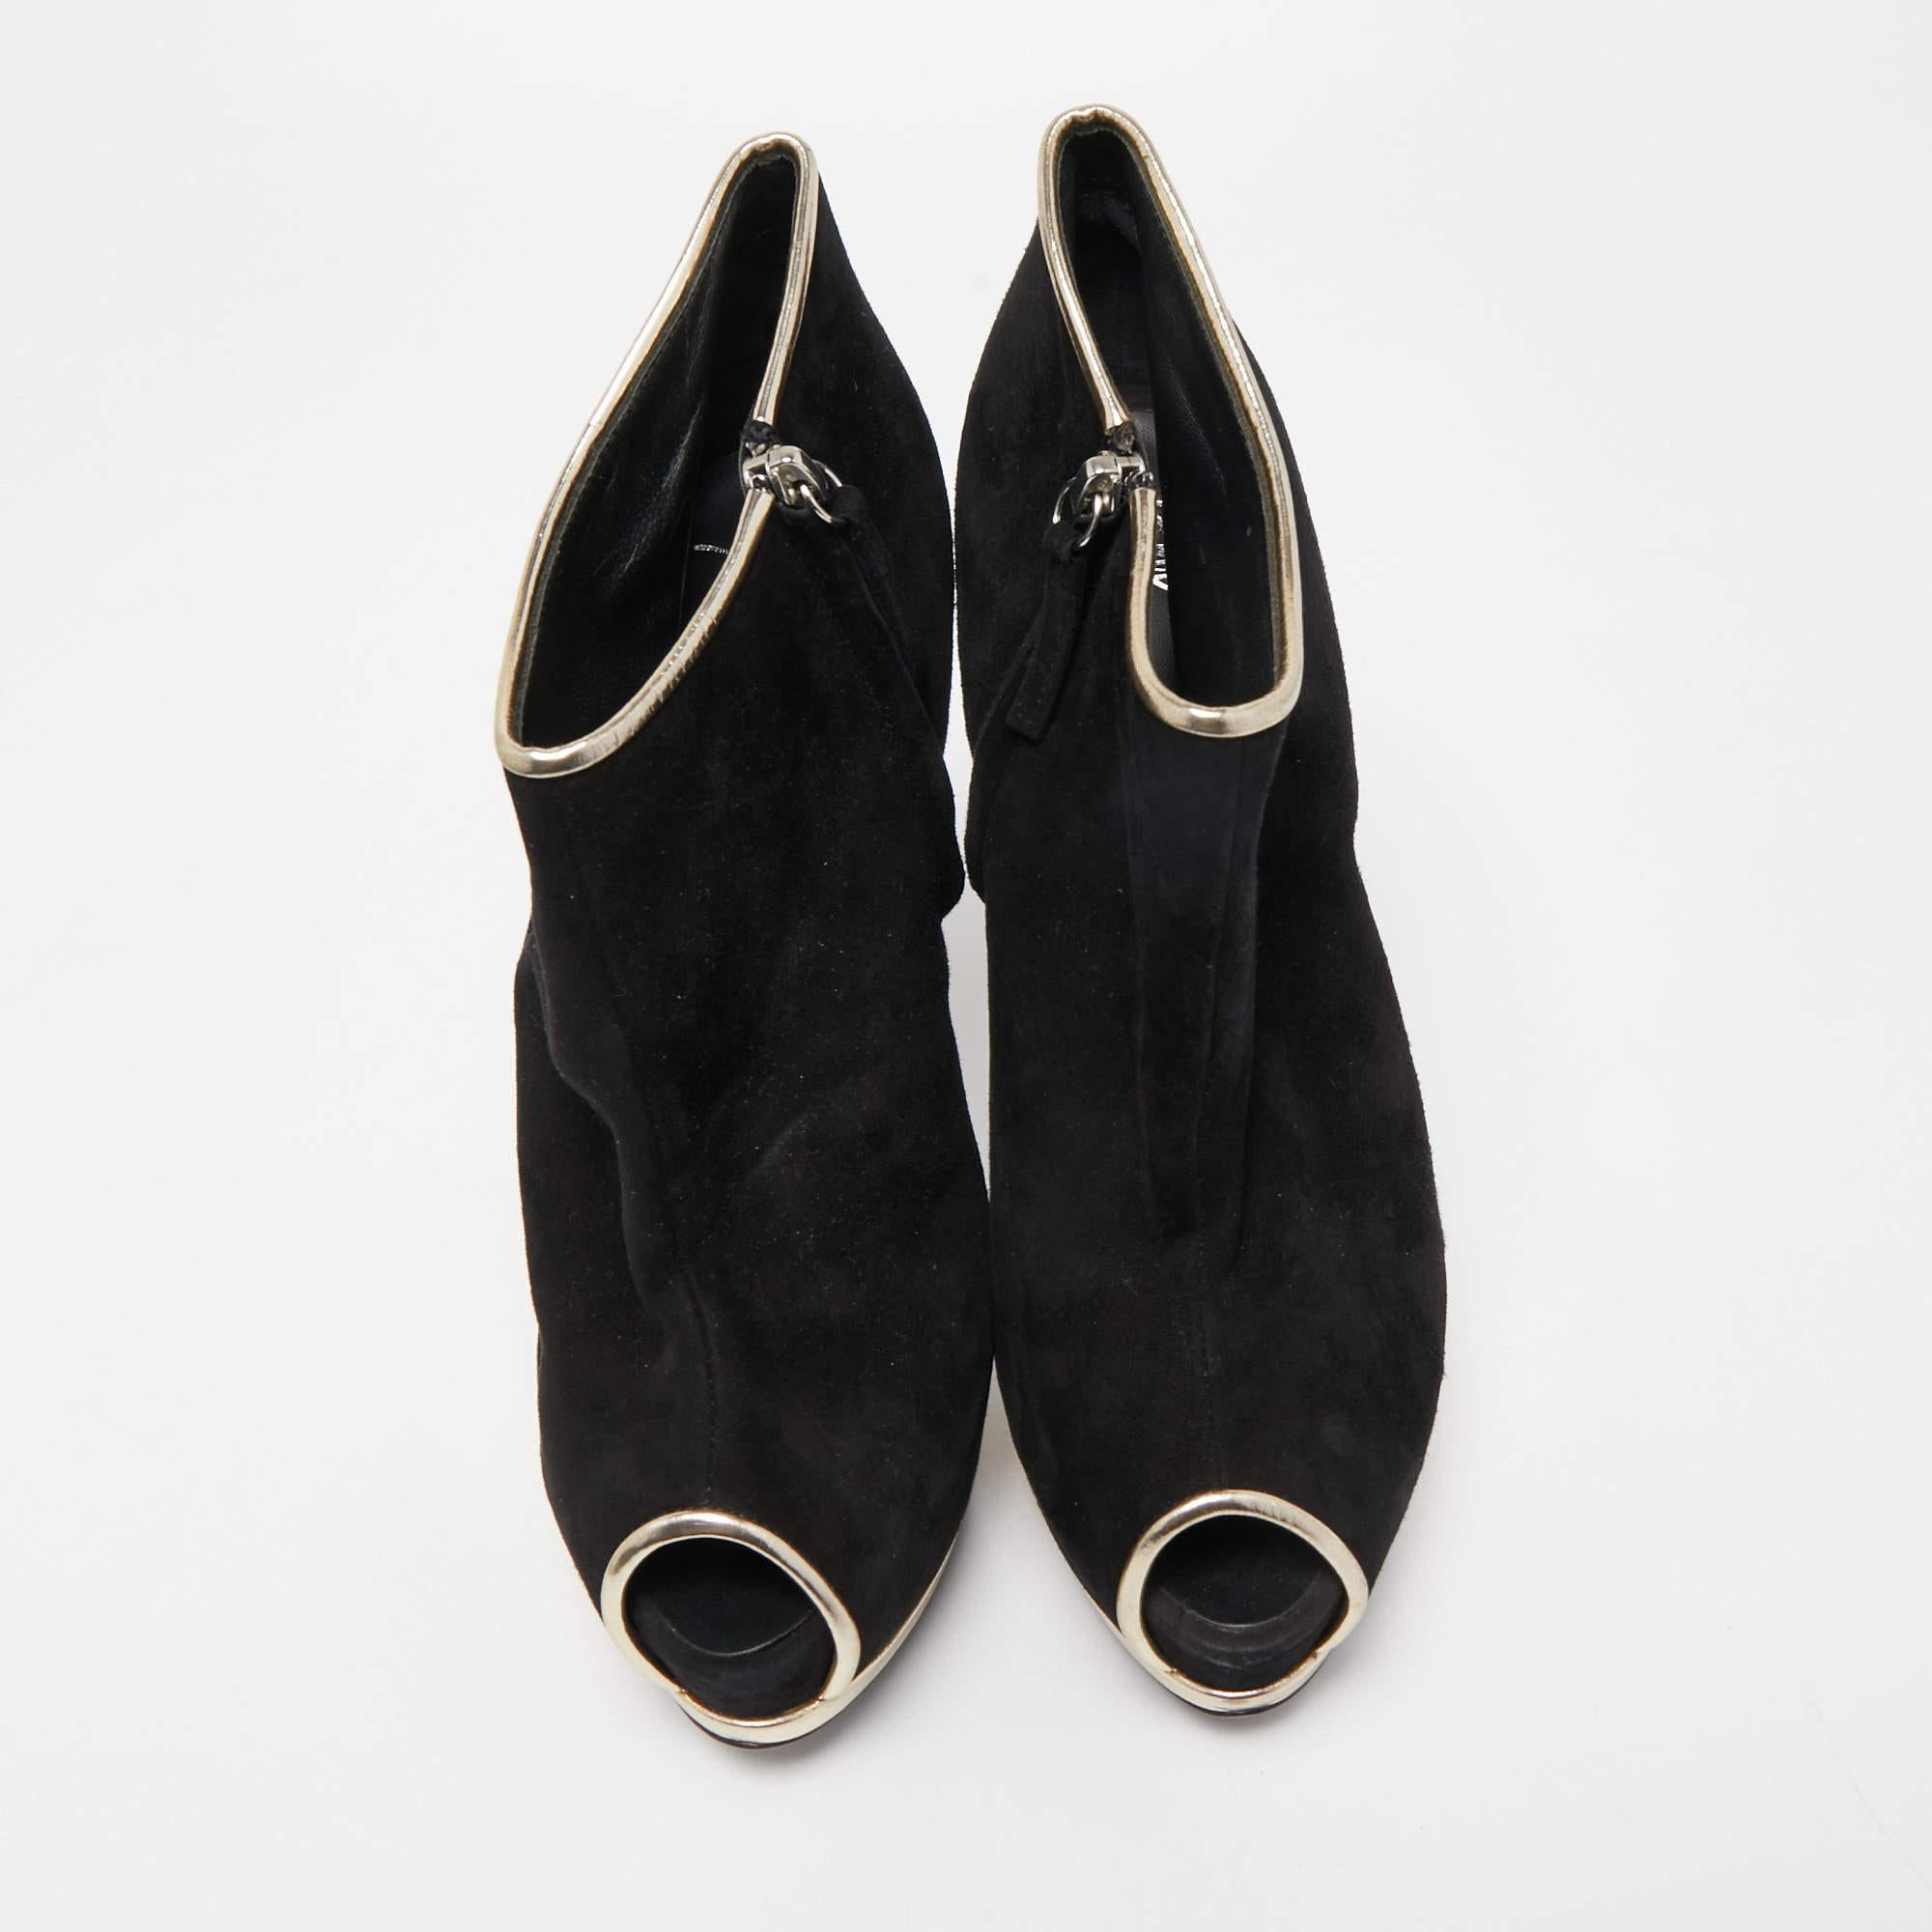 The Giuseppe Zanotti ankle boots exude timeless elegance. Crafted with meticulous attention to detail, these boots feature a seamless blend of sumptuous black suede and luxurious leather. The sleek design, complemented by a sturdy heel and expert